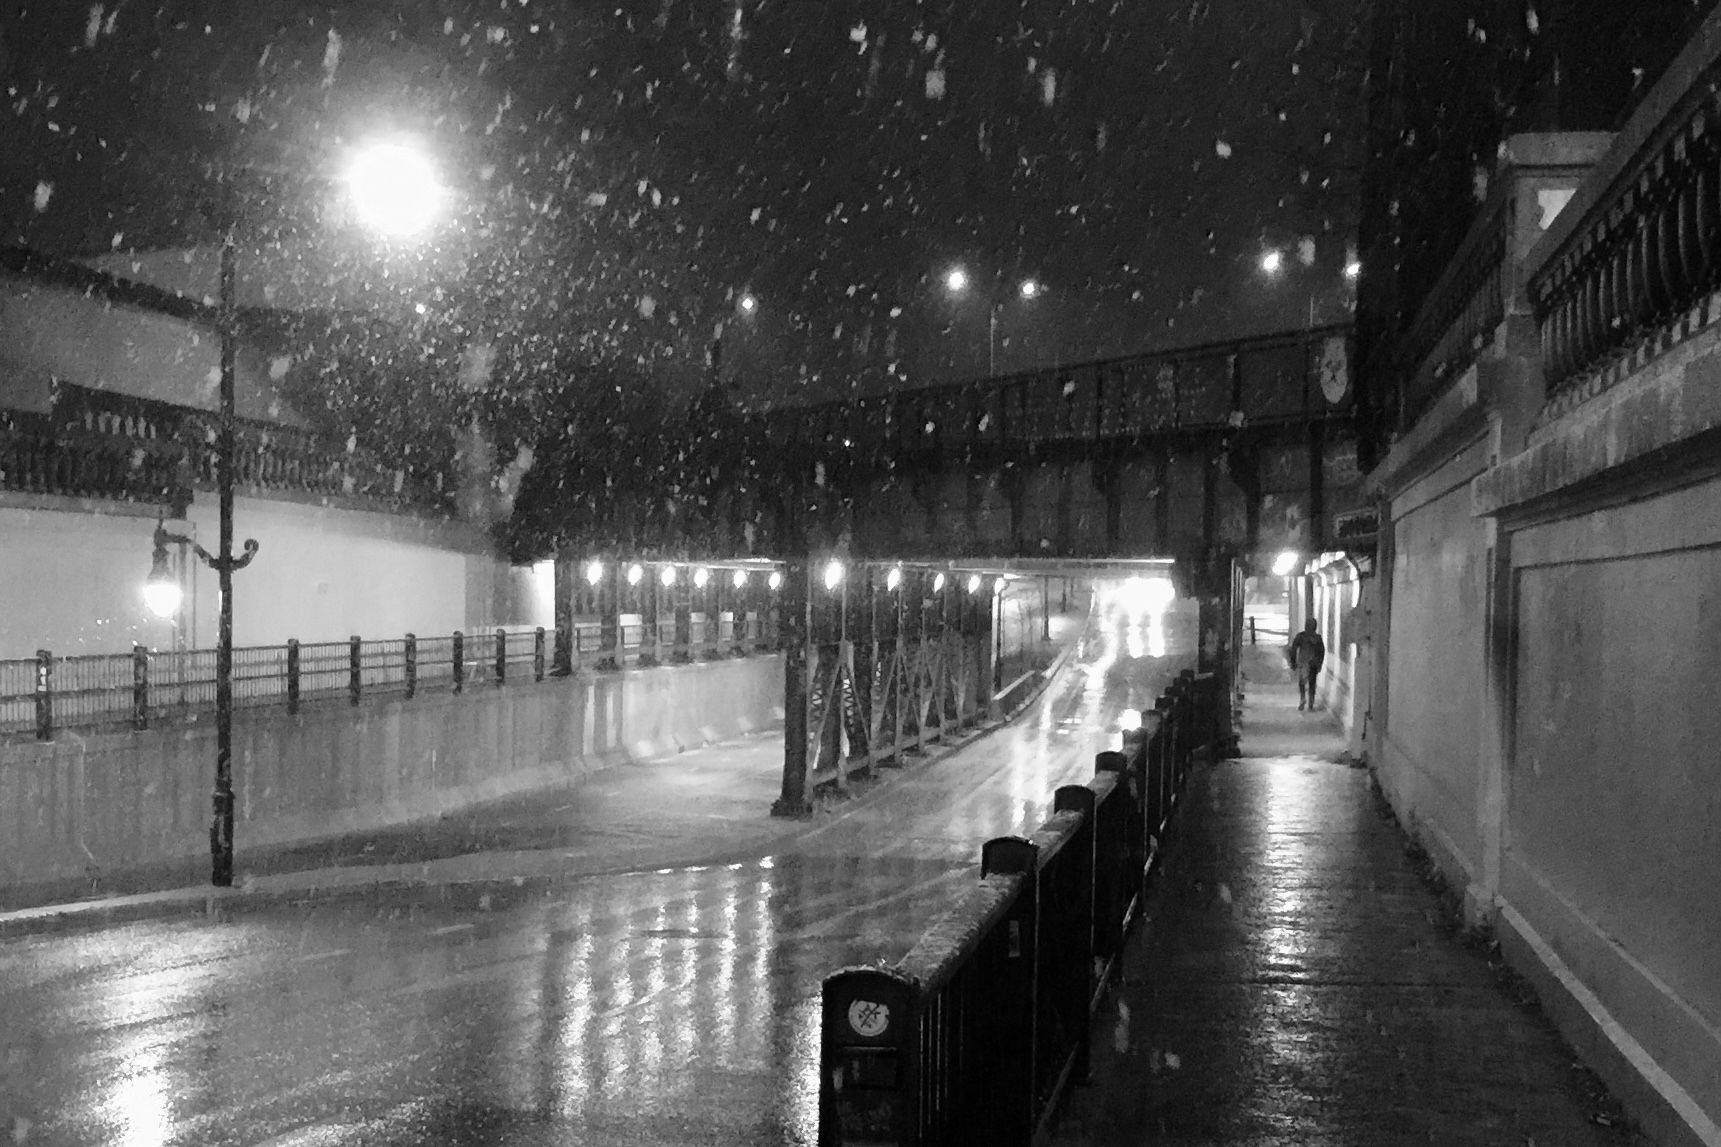 It’s snowing and somebody is walking through an underpass under a railway bridge.